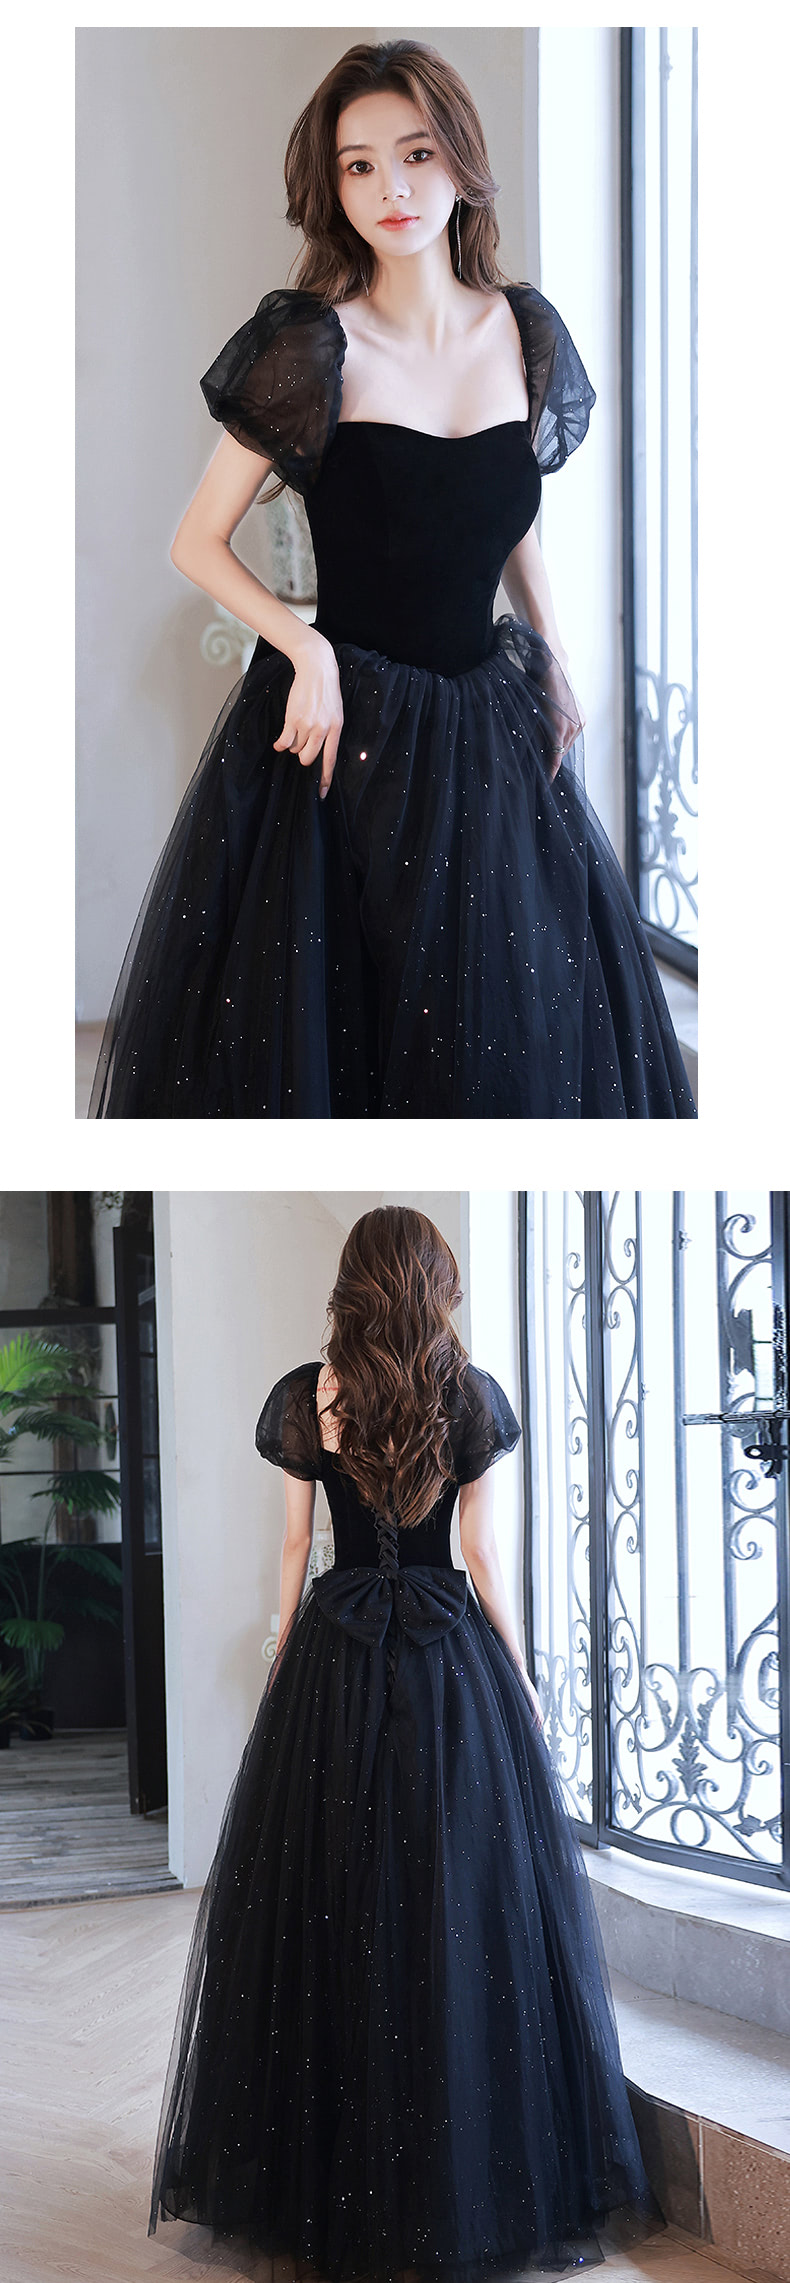 Black-Prom-Evening-Maxi-Dress-Homecoming-Outfit-with-Bowknot16.jpg